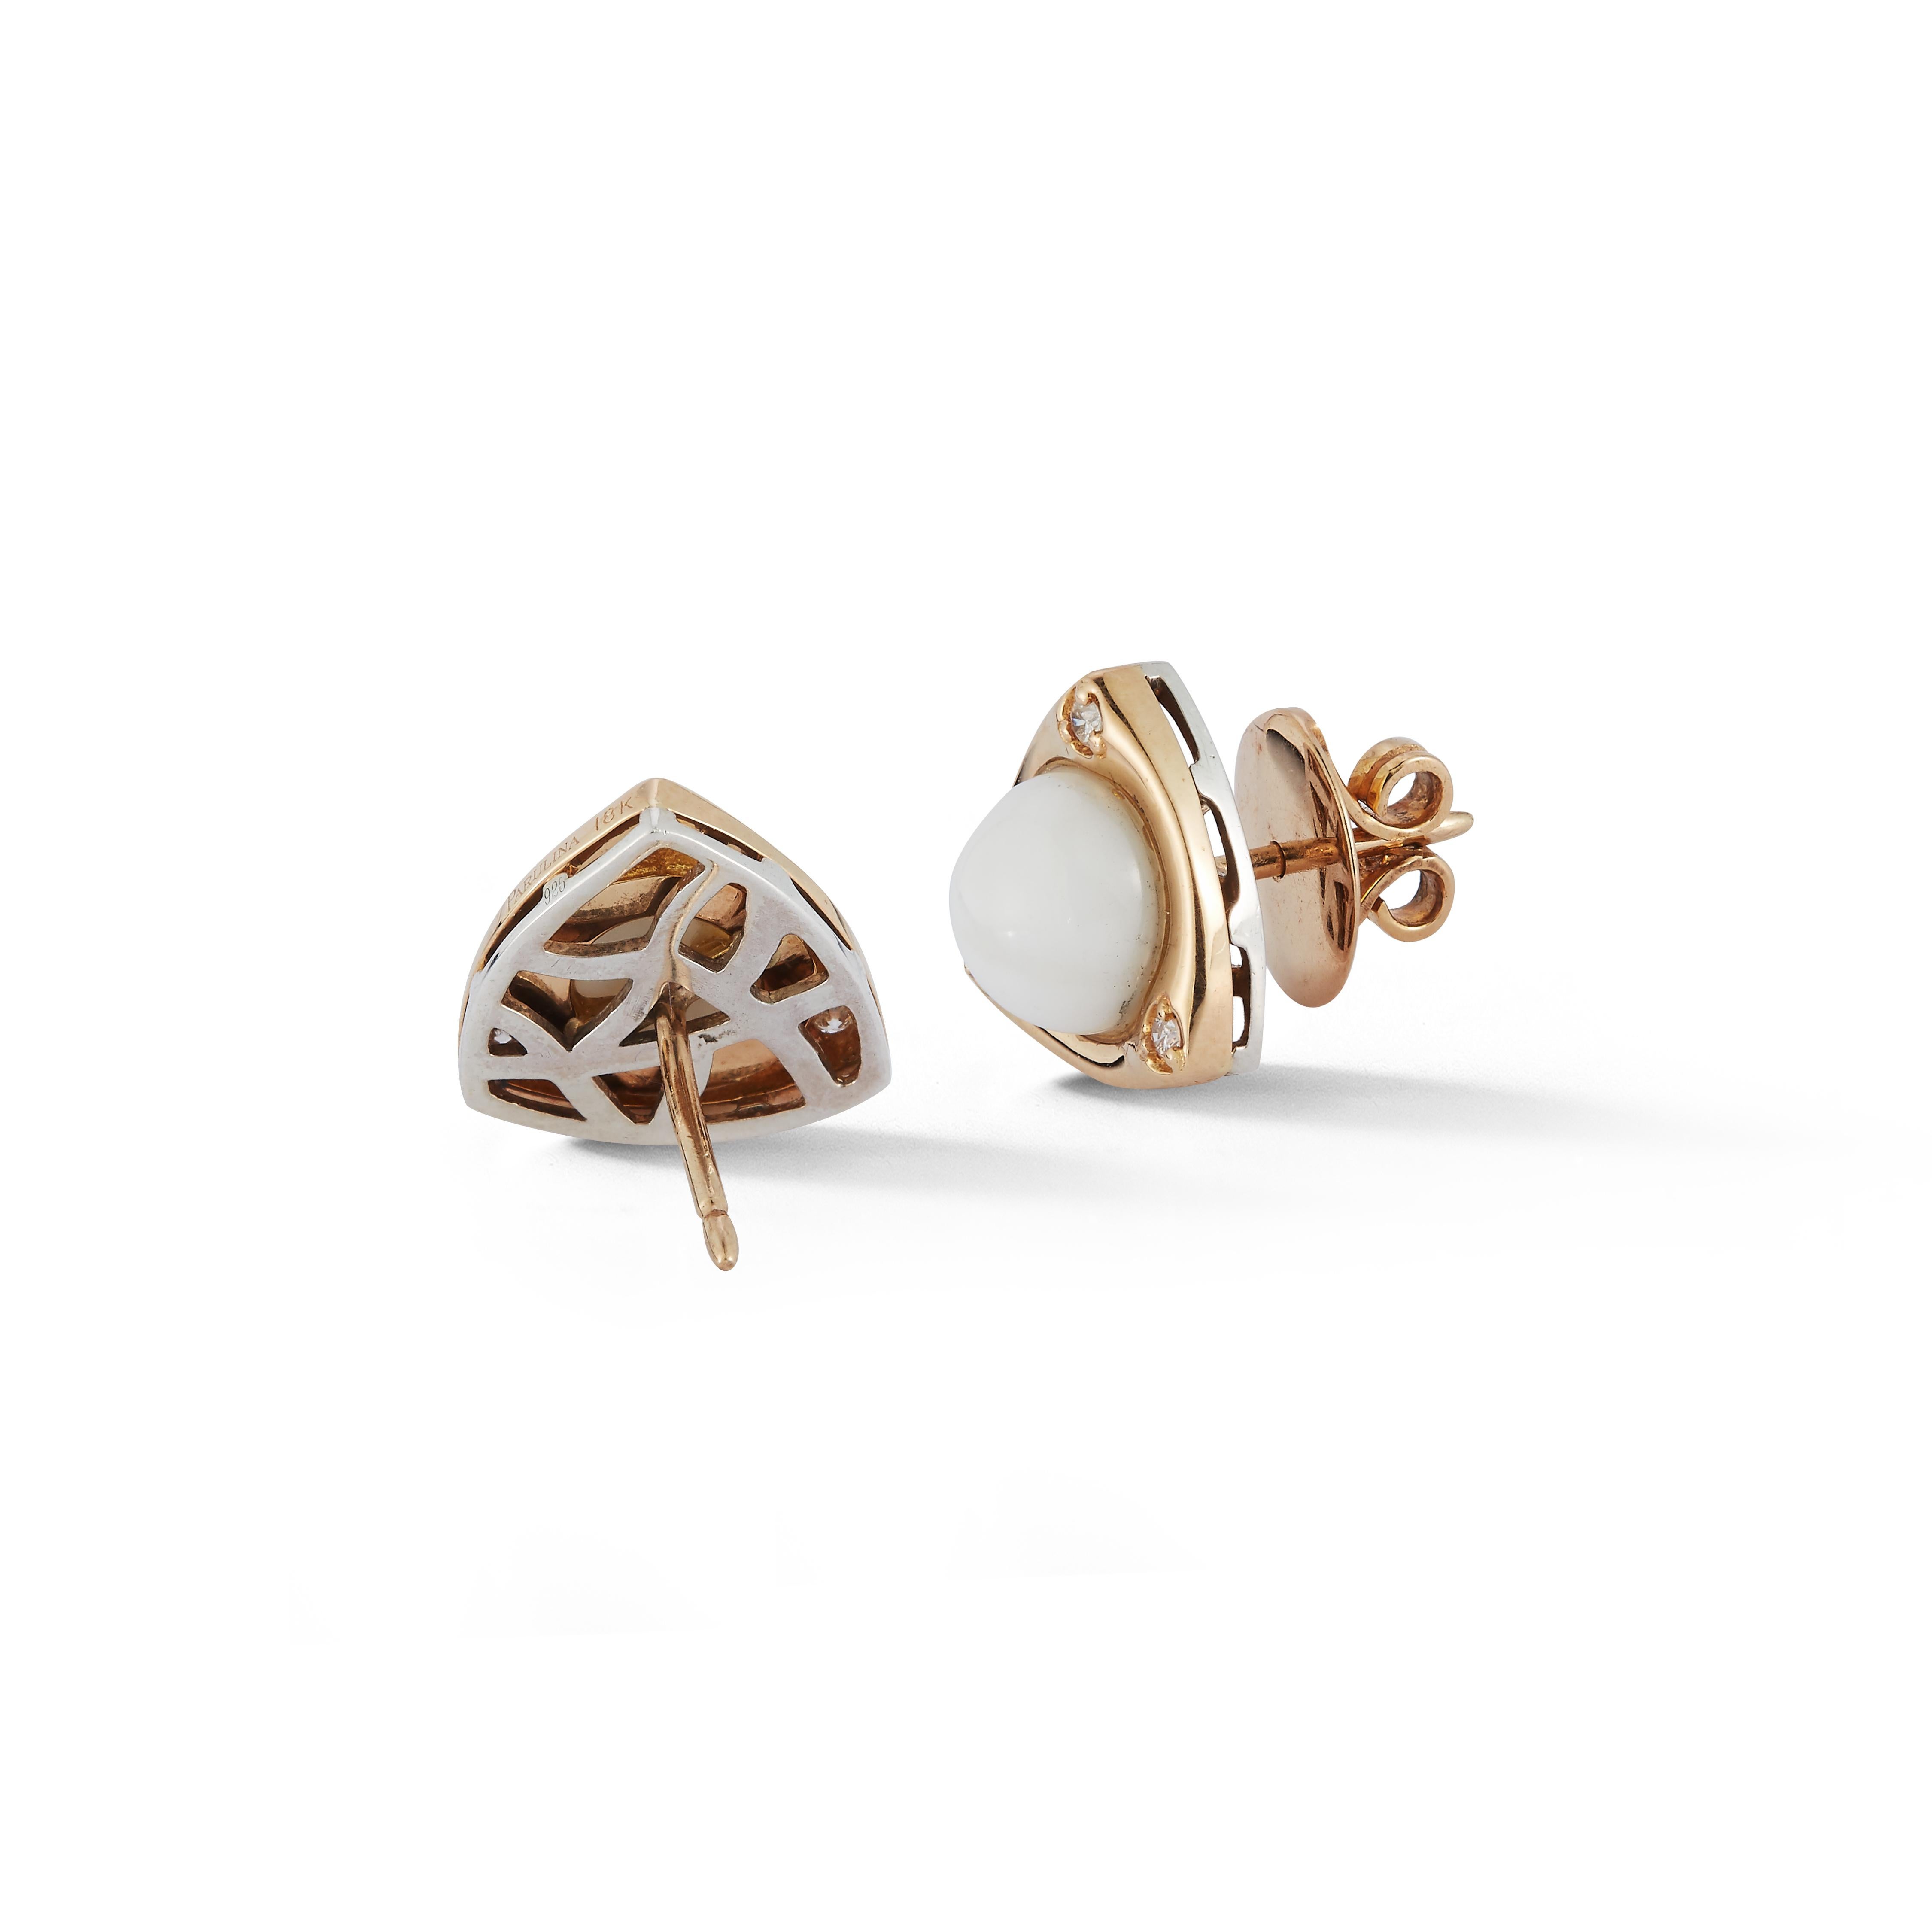 Parulina Couture Fine Jewelry-White Coral Stud Earrings from the Isle of Capri Collection. 
8.00ct of Coral set in 18Y Yellow Gold.

Metal: 18K Yellow Gold
Gemstone Carat Weight: 8.00ct